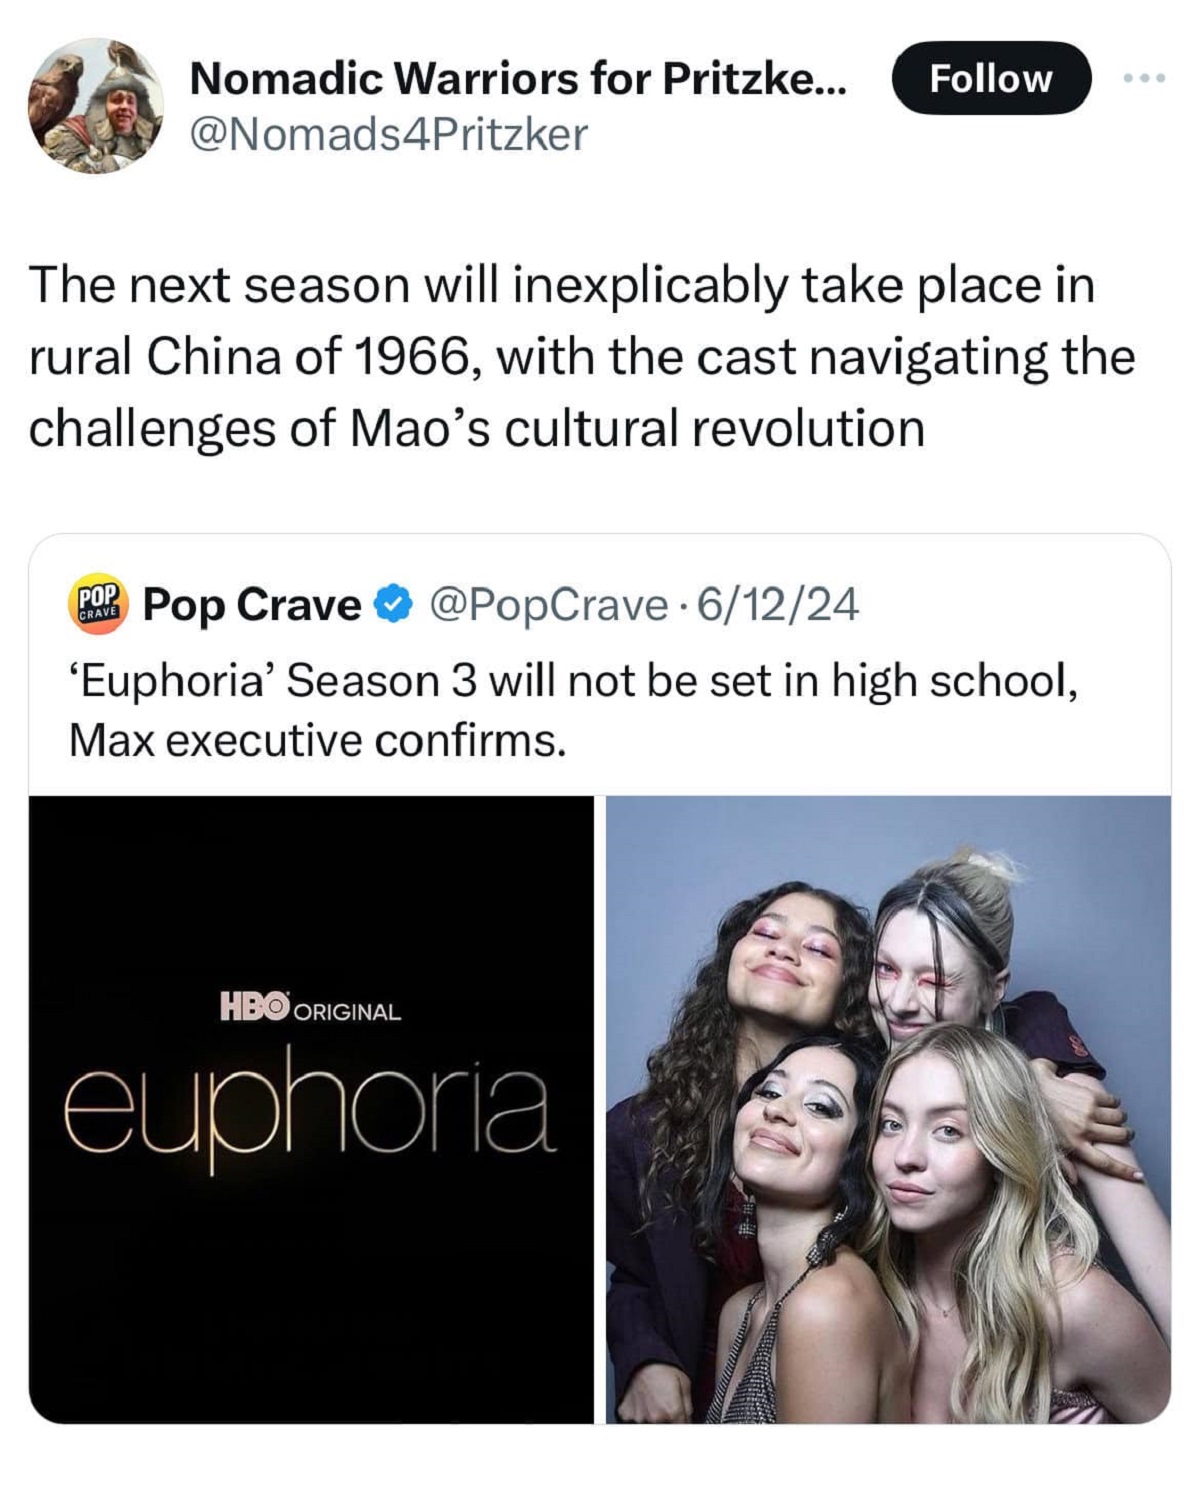 euphoria girl - Nomadic Warriors for Pritzke... The next season will inexplicably take place in rural China of 1966, with the cast navigating the challenges of Mao's cultural revolution Crave Pop Pop Crave 61224 'Euphoria' Season 3 will not be set in high